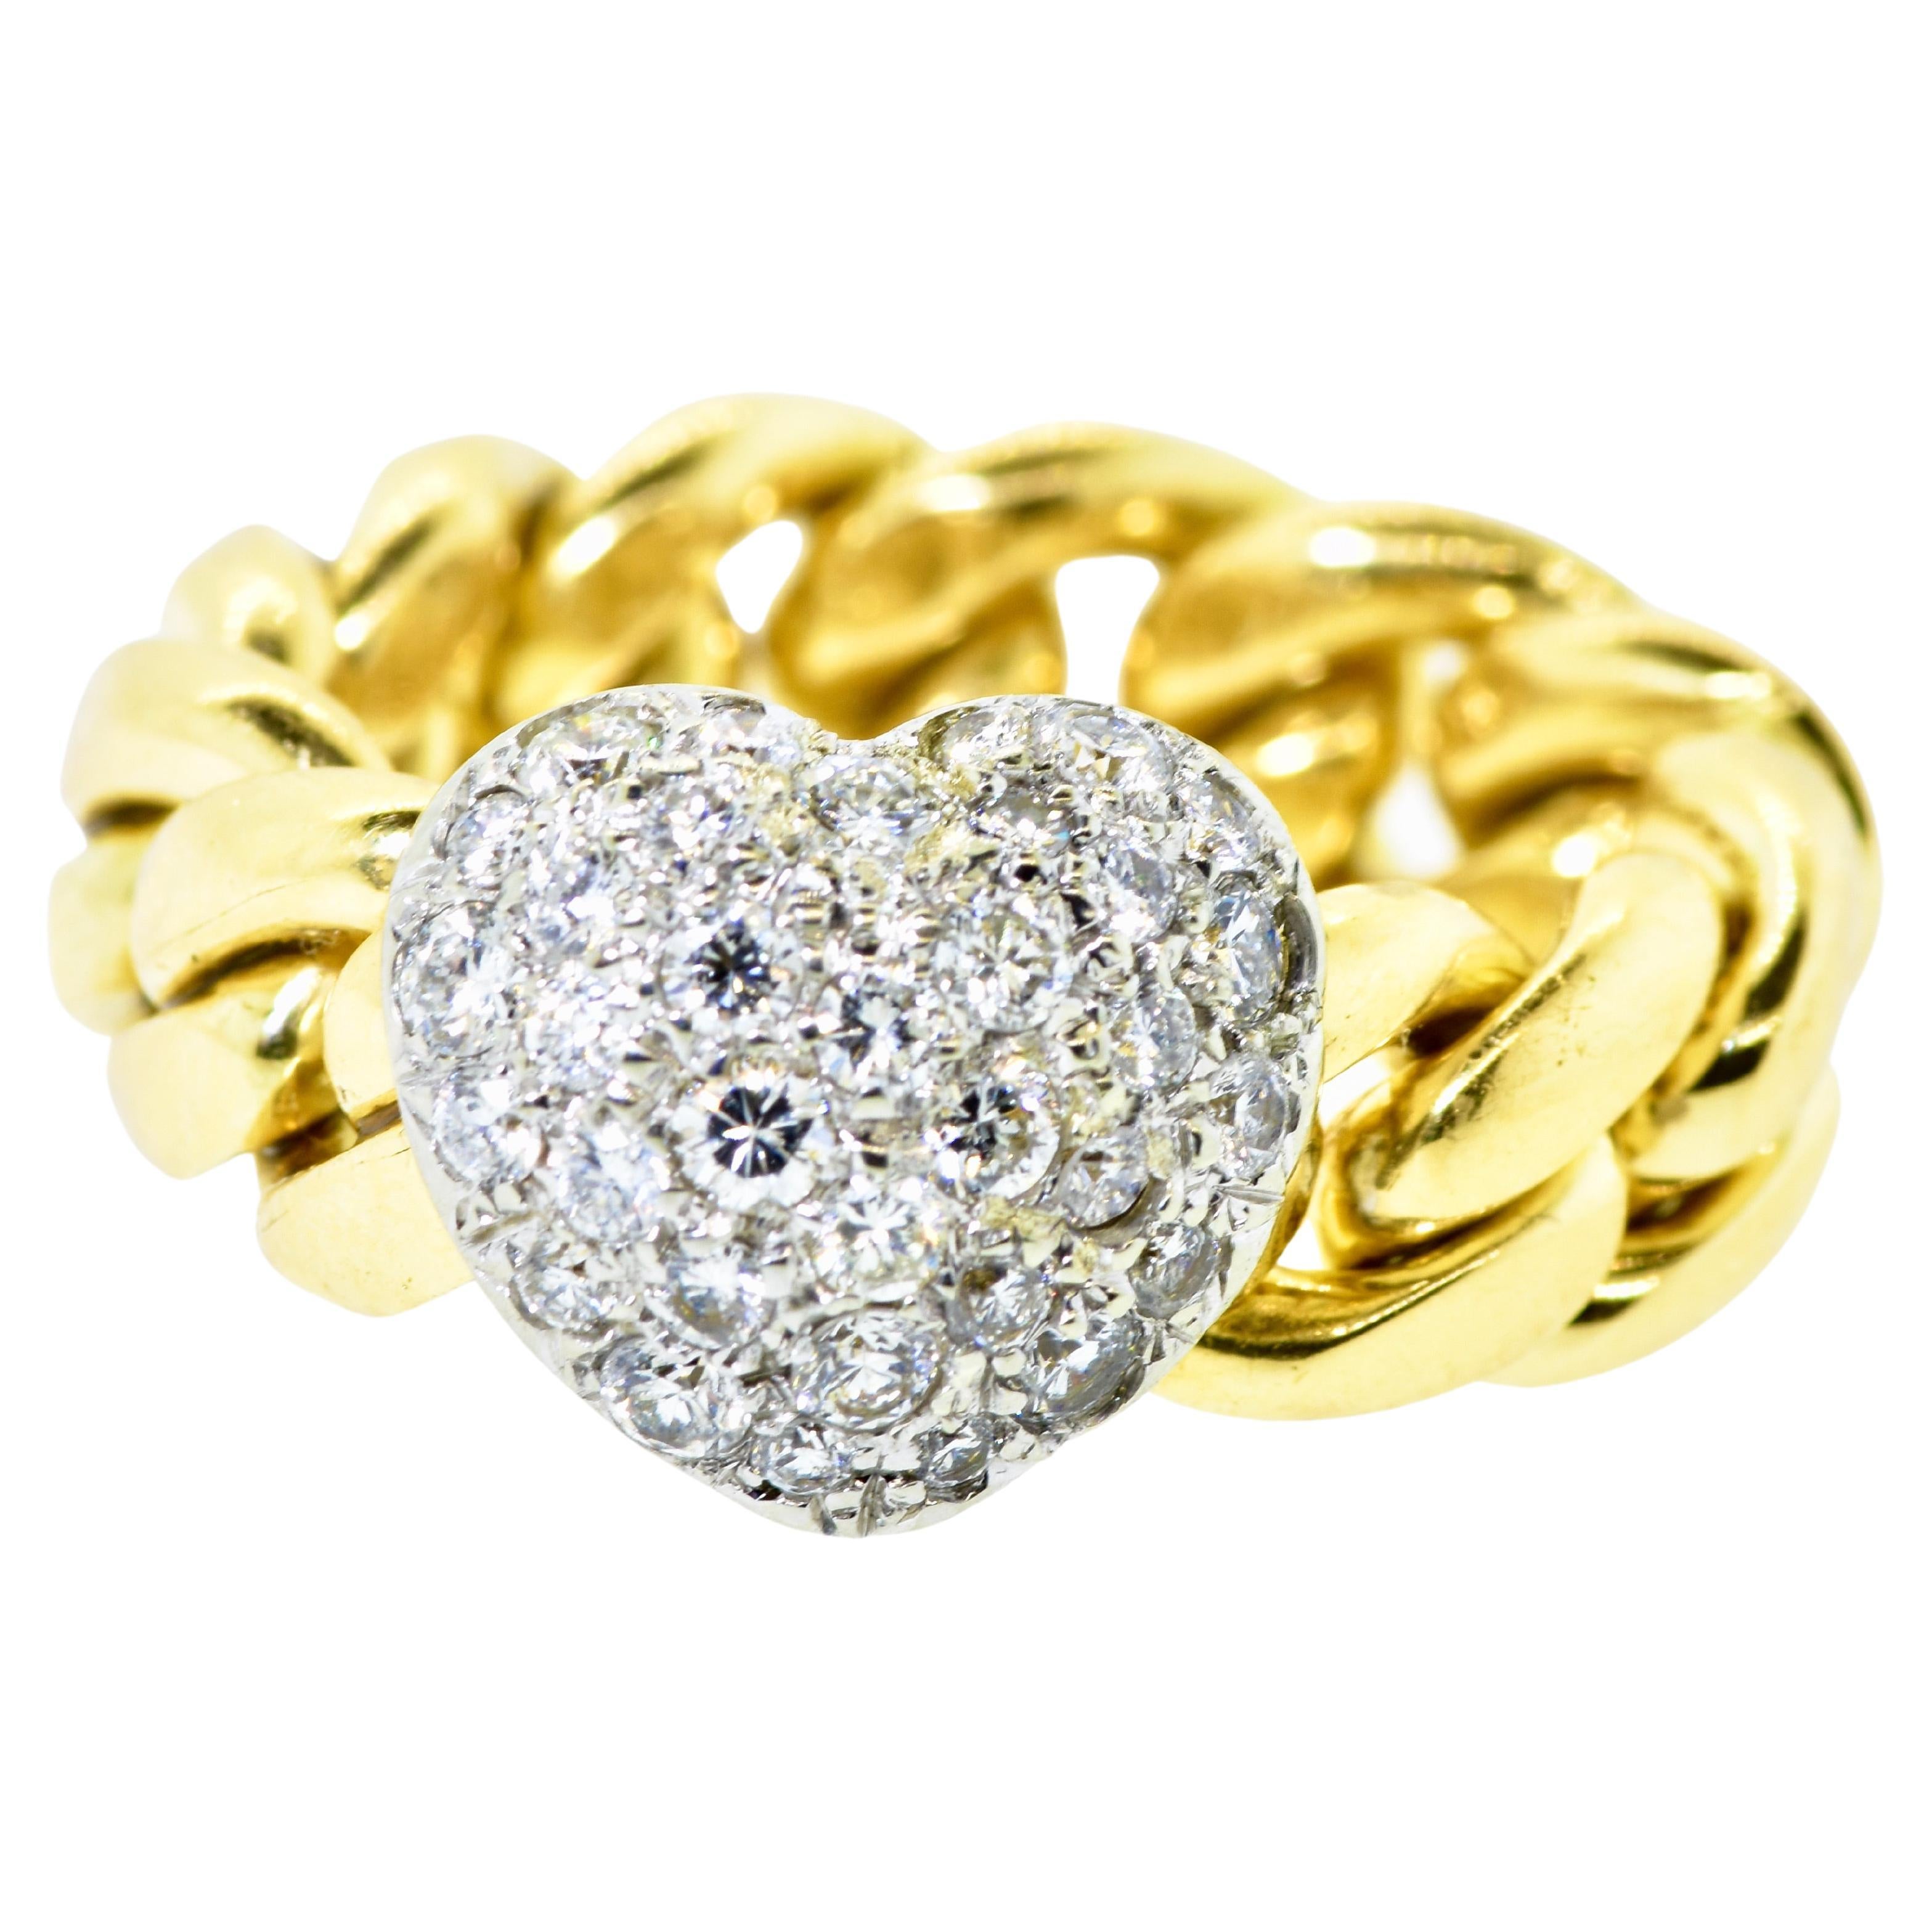 Valente Platinum and 18K yellow gold heart motif unusual ring.  The platinum and diamond pave heart slides along the flexible 18K gold link.  The diamonds are quite nice. Brilliant cut, all well matched and finely cut.  The diamonds set in platinum